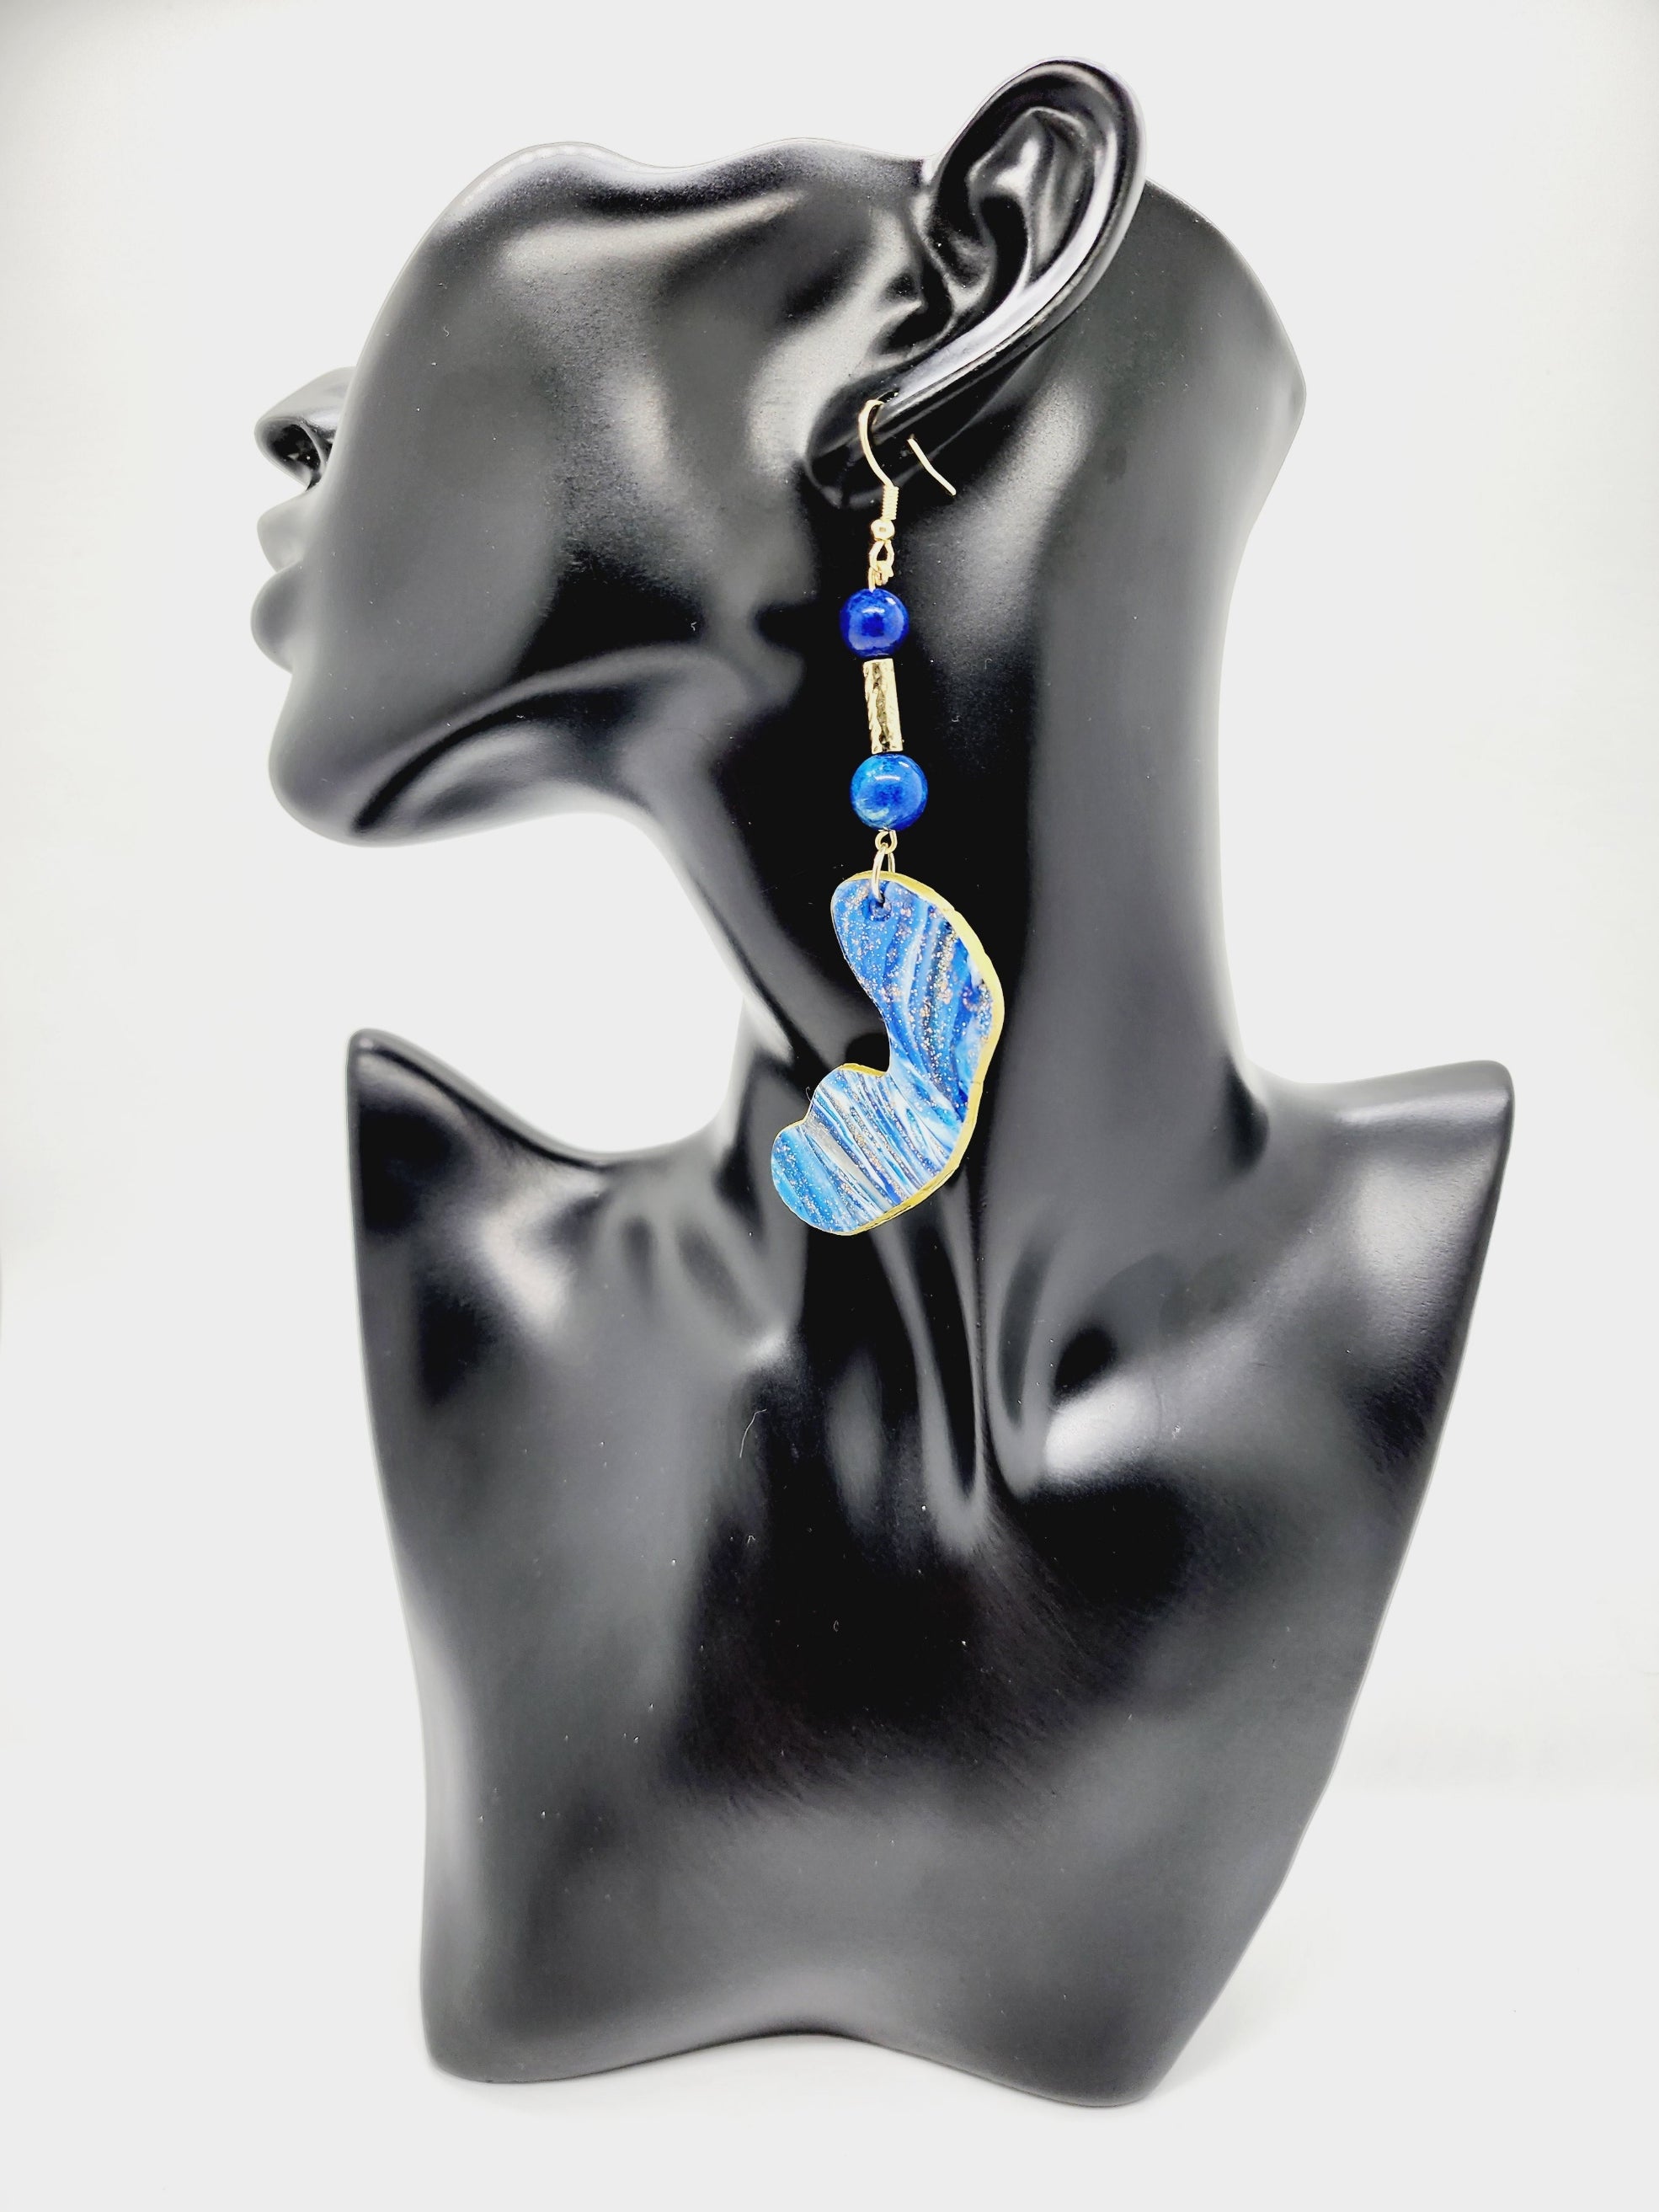 Length: 4 inches | Weight: 0.6 ounces   Distinctly You! These handmade earrings are made using blue and gold swirl polymer clay, gold tube bead, blue speckled beads, and hypoallergenic hooks with back closures. 